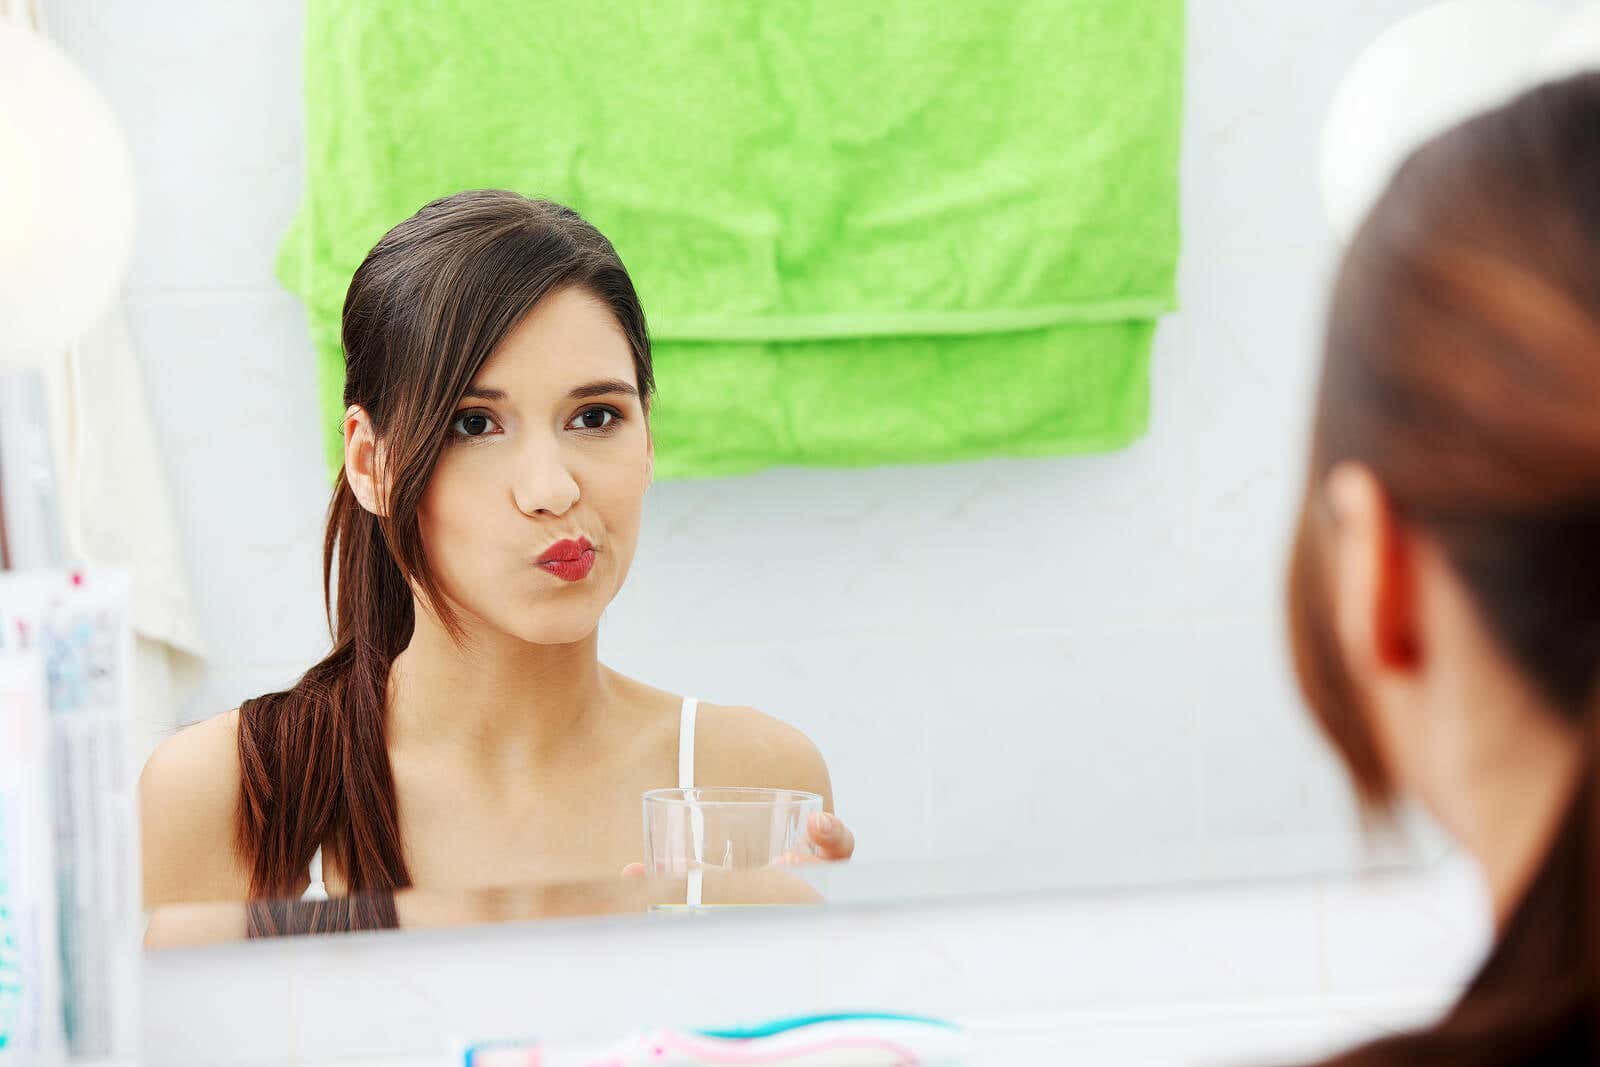 A woman rinsing her mouth.